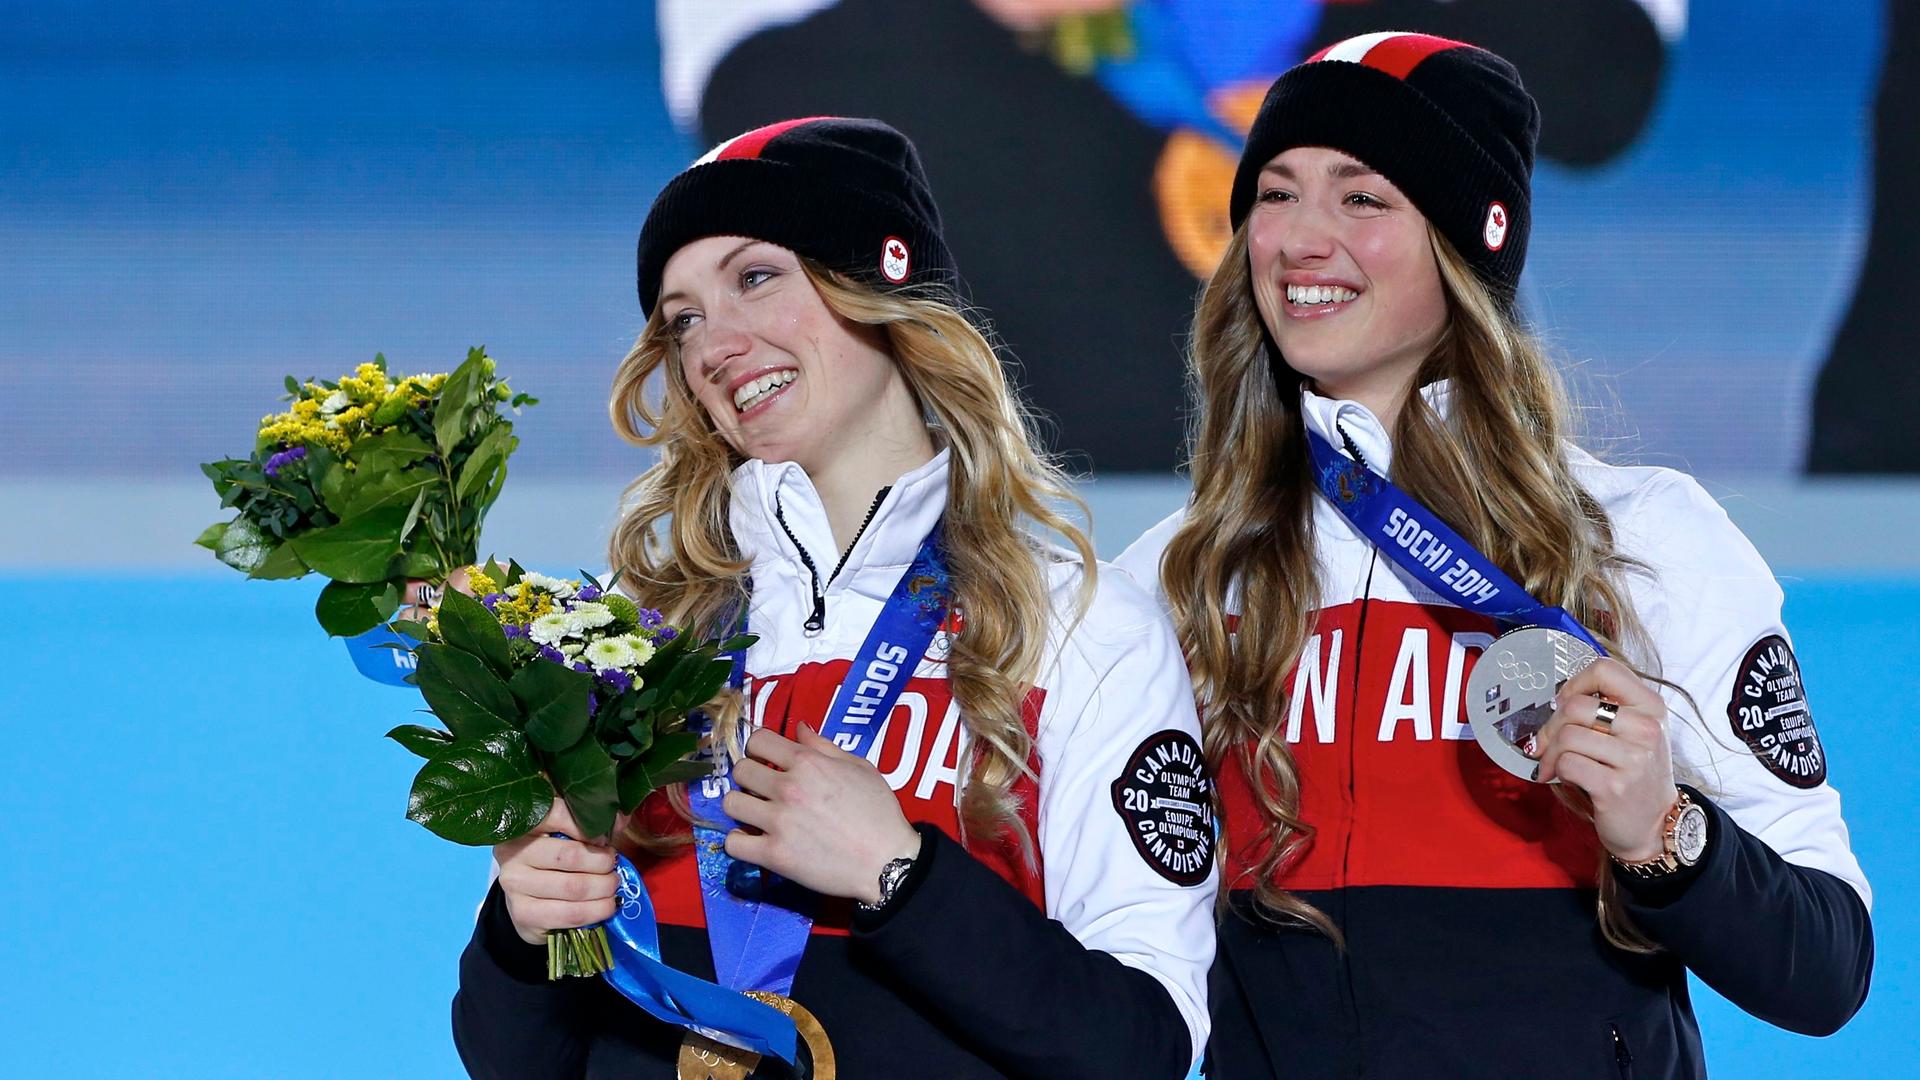 Gold medalist Justine Dufour-Lapointe of Canada poses with silver medalist Chloe Dufour-Lapointe. The sisters competed in the women's freestyle skiing moguls at the Sochi Winter Olympics. A Canadian TV host criticized how CBC announcers were pronouncing t